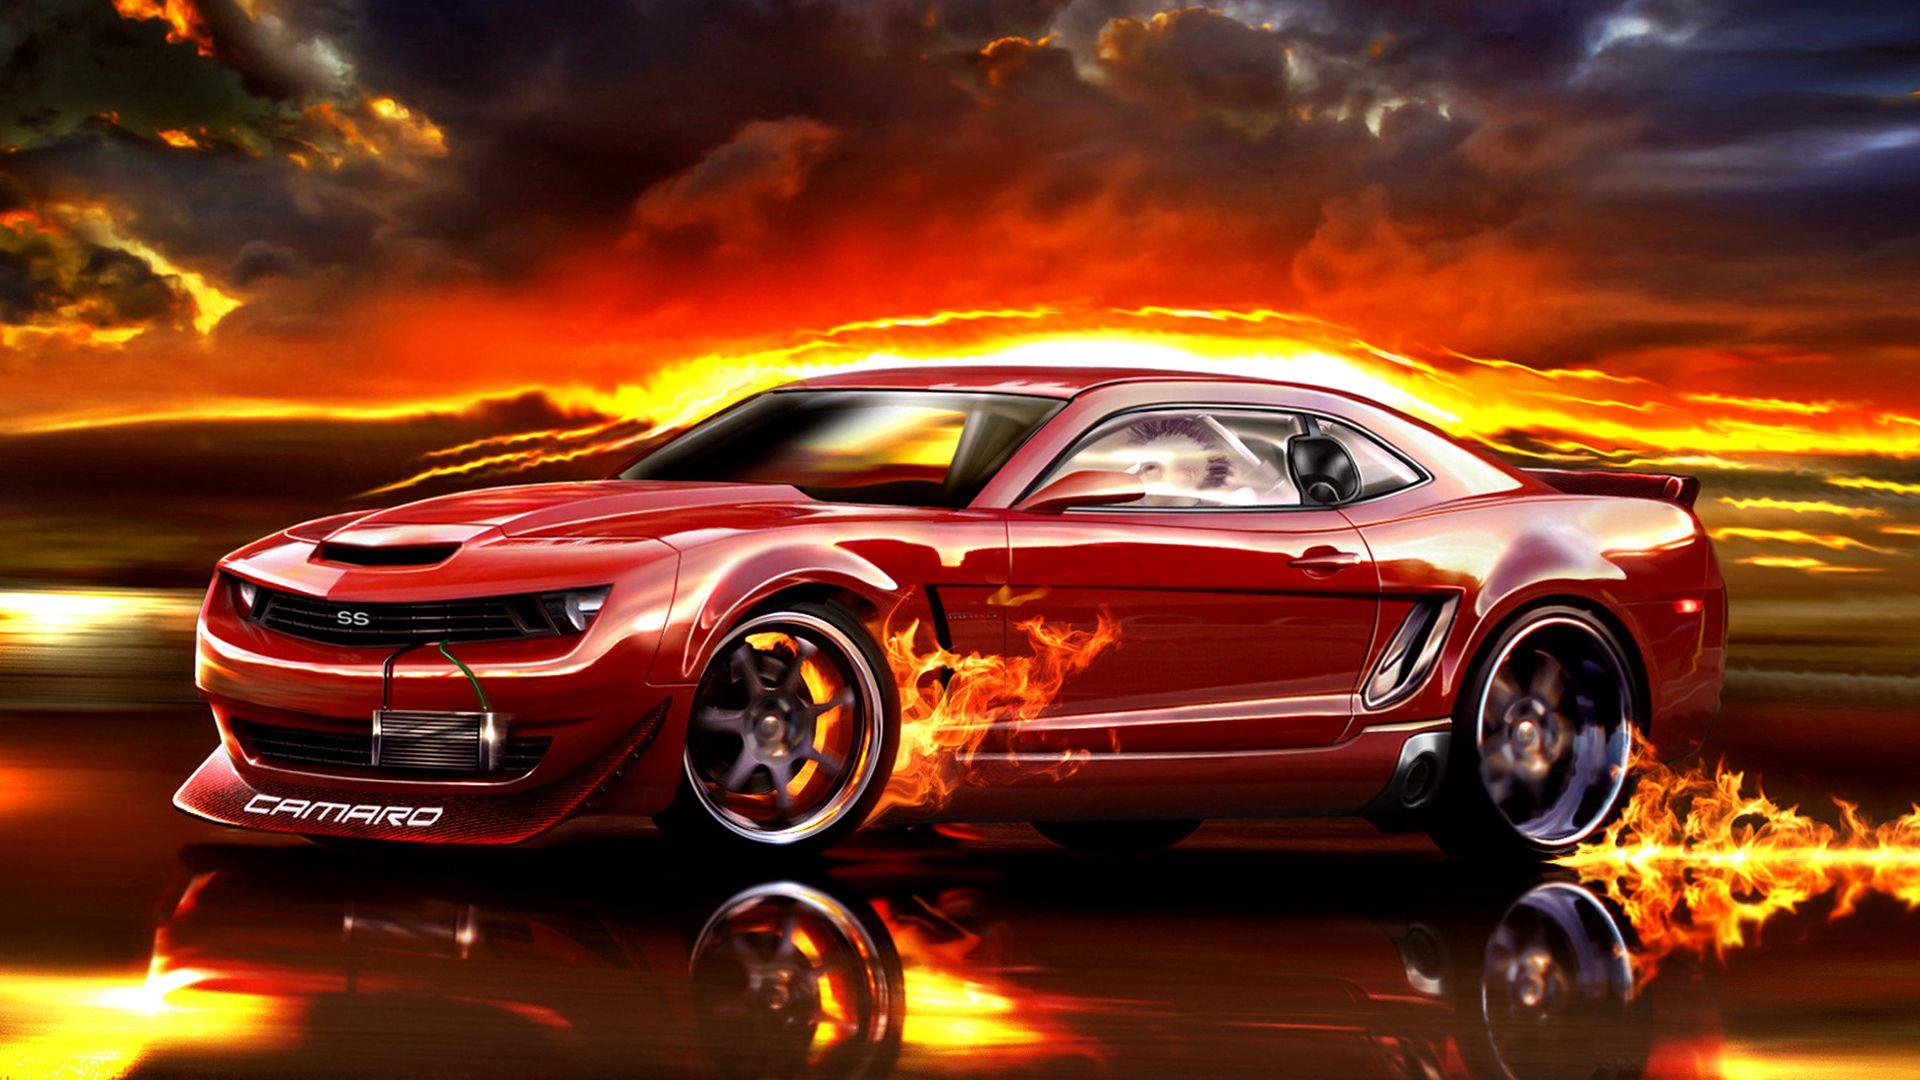 Red Chevrolet Camaro Fire Wallpaper HD / Desktop and Mobile Background